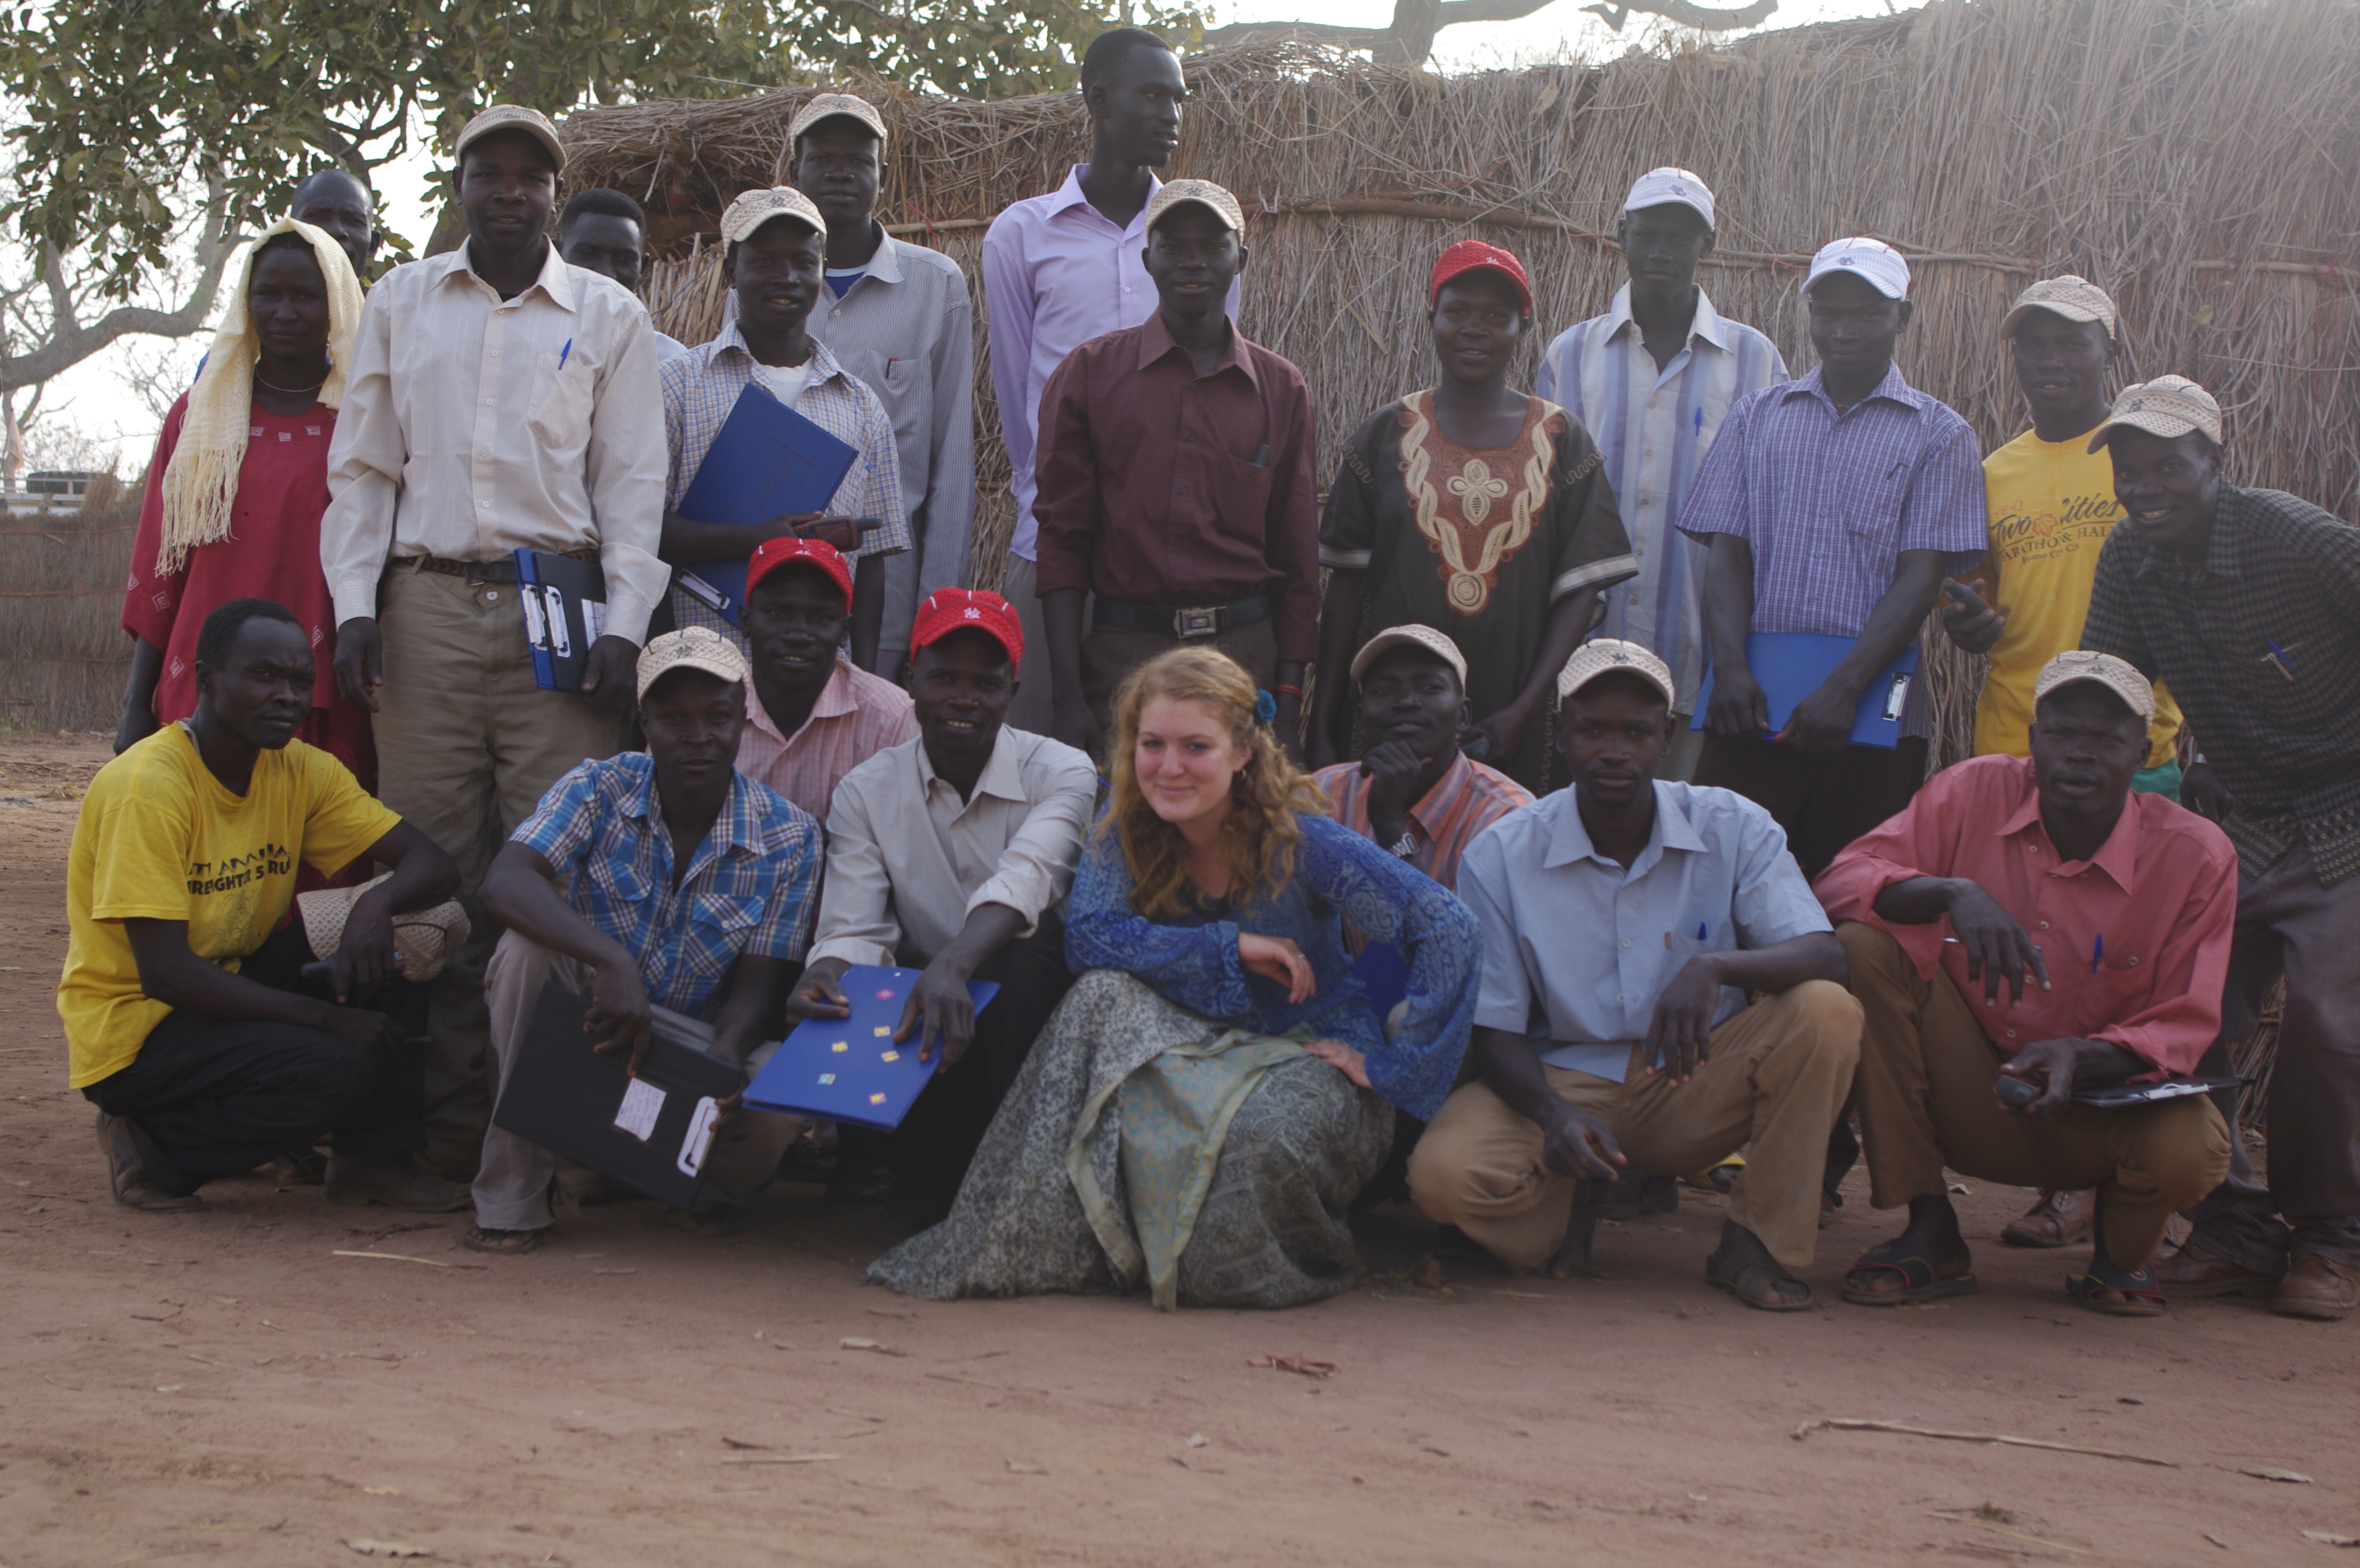 Nadia with her research team in South Sudan, February 2013